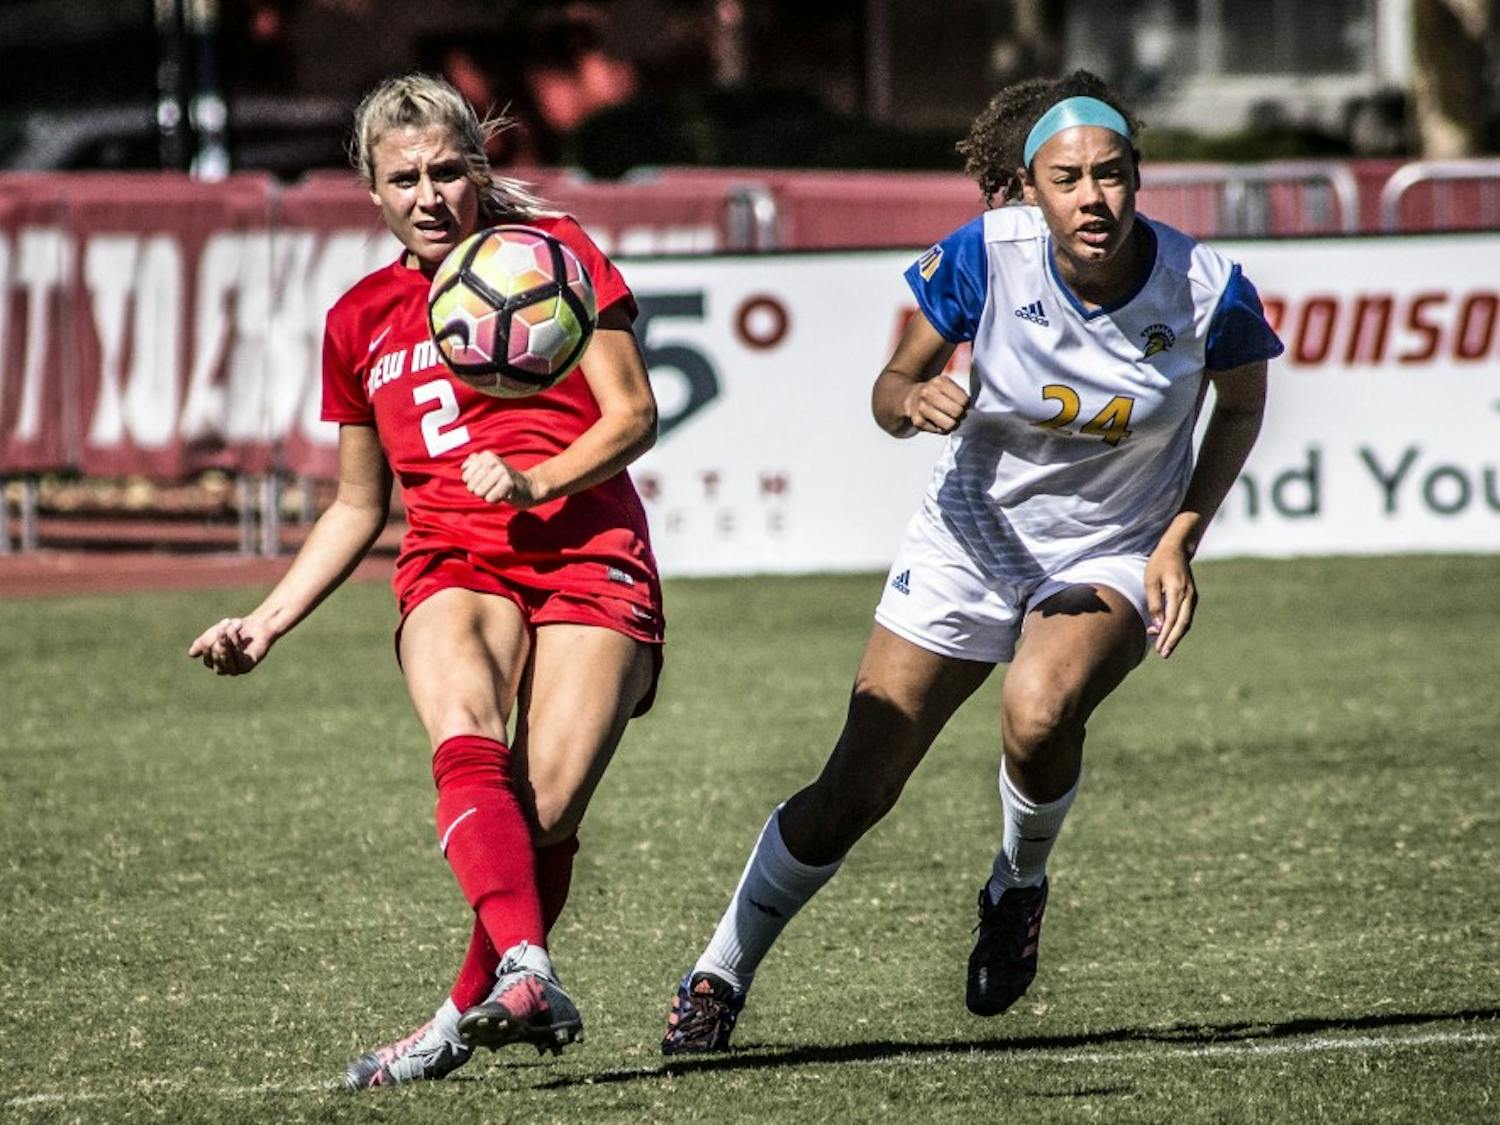 Jessica Nelson clears the ball as Kiara Parker of San Jos? State University contests at the UNM Soccer Complex on Oct. 8, 2017. UNM fell short with a 1-2 loss against SJSU.